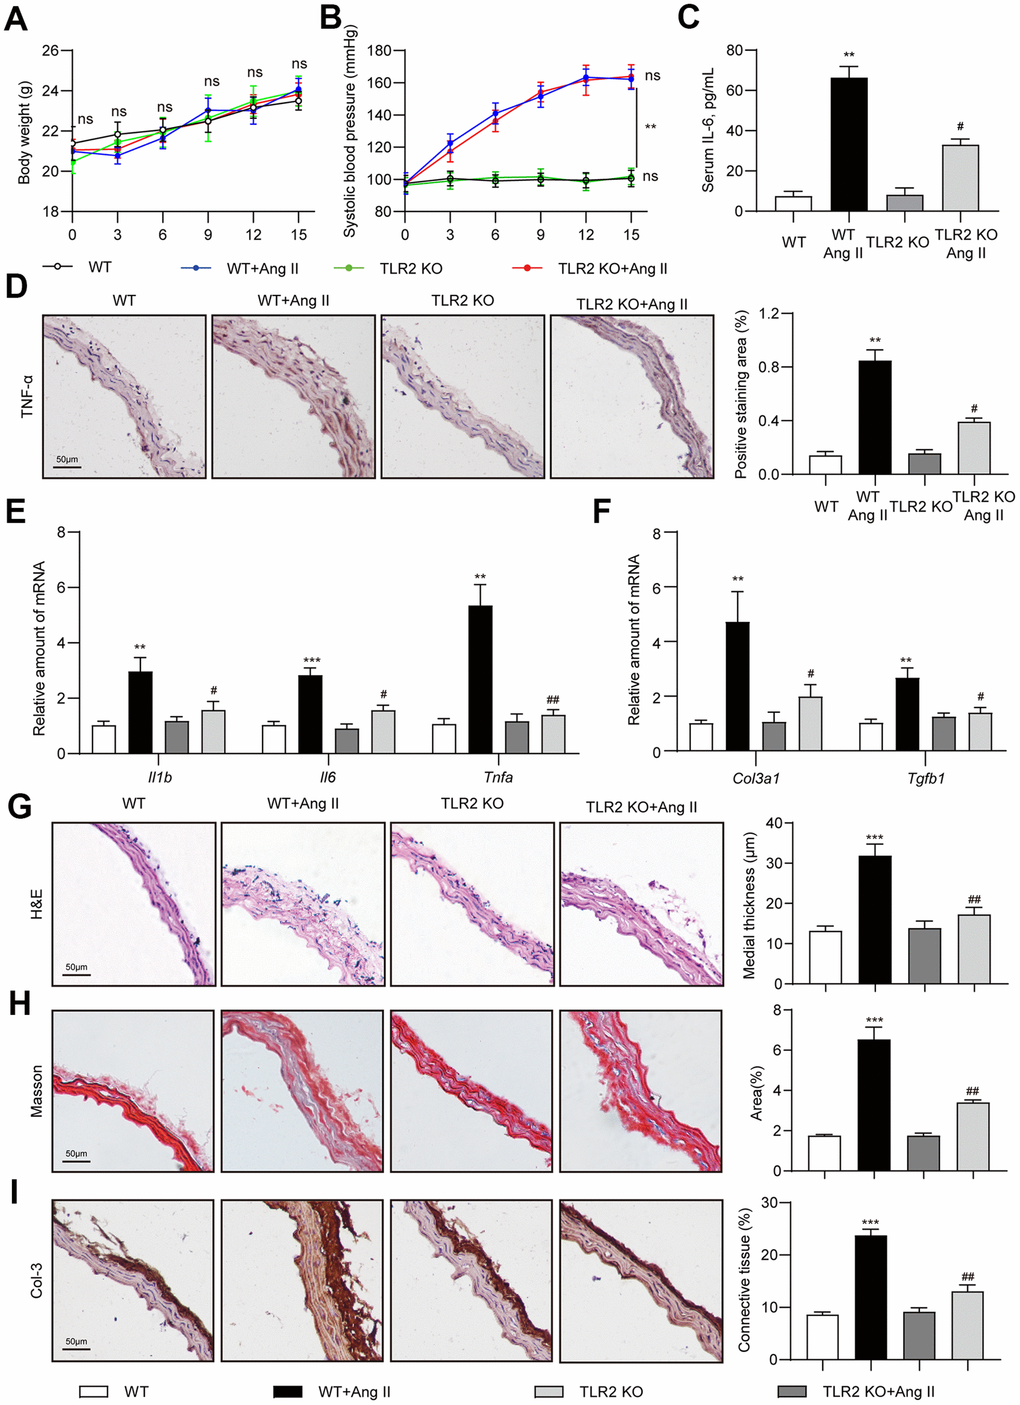 TLR2 deficiency prevents Ang II-induced vascular remodeling in mice. Wildtype (WT) and TLR2 knockout (TLR2KO) mice were challenged with Ang II for 2 weeks. Data showing (A) body weights of mice, (B) systolic blood pressure measurements, and (C) levels of serum interleukin-6 (IL-6). (D) Representative images of TNF-α staining of mouse aortic tissues [scale bar = 50 μm]. Quantification of TNF-α staining area is shown on right. (E, F) mRNA levels of pro-inflammatory and fibrosis-associated genes in aortic tissues [data normalized to β-actin]. (G, H) H&E and Masson's Trichrome staining of mouse aortic sections illustrating the degree of medial thickening and fibrosis [scale bar = 50 μm]. Quantification of medial thickening and connective tissue deposition are shown on right. (I) Representative images of Col-3 staining (brown) of aortic sections. Tissues were counterstained with hematoxylin (blue) [scale bar = 50 μm]. Quantification of Col-3 staining is shown on right. [n = 6-8; Data shown as Mean ± SEM; **p